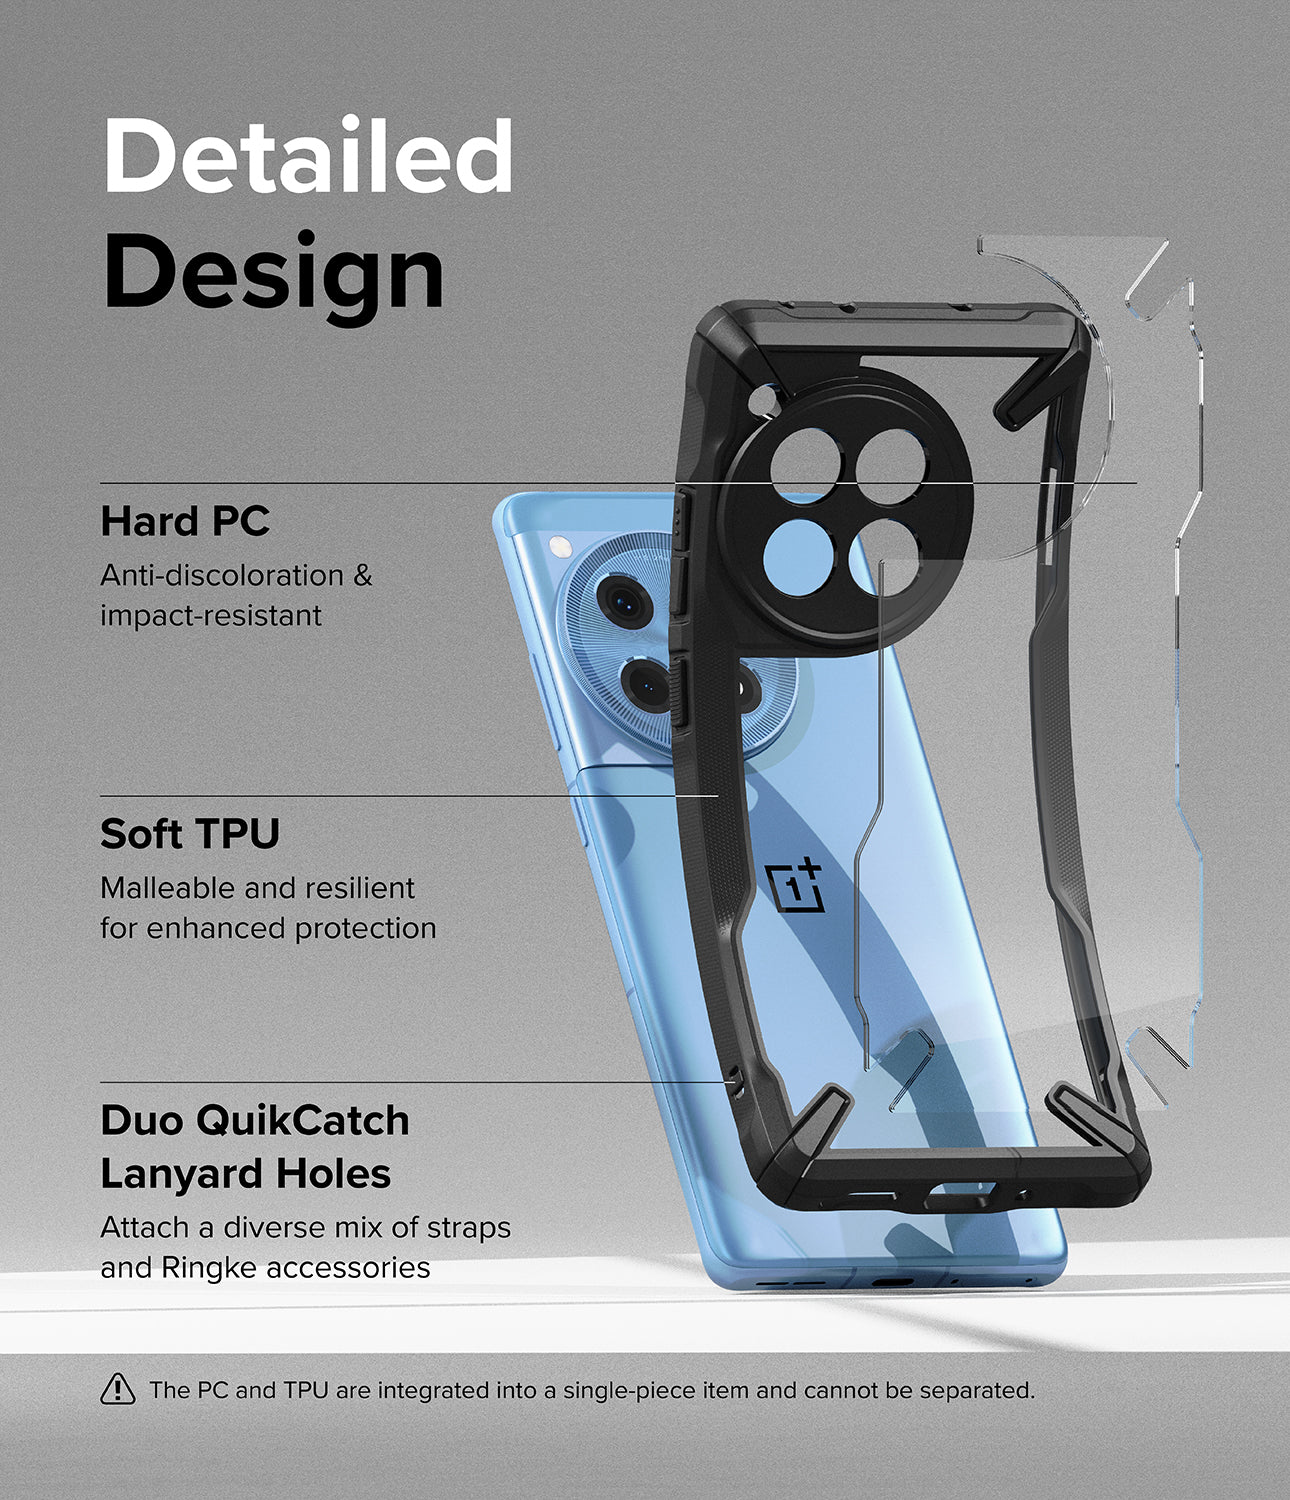 OnePlus 12R Case | Fusion-X Black - Detailed Design. Anti-discoloration and impact-resistant with Hard PC. Malleable and resilient for enhanced protection with Soft TPU. Duo QuikCatch Lanyard Holes to attach a diverse mix of straps and Ringke accessories.